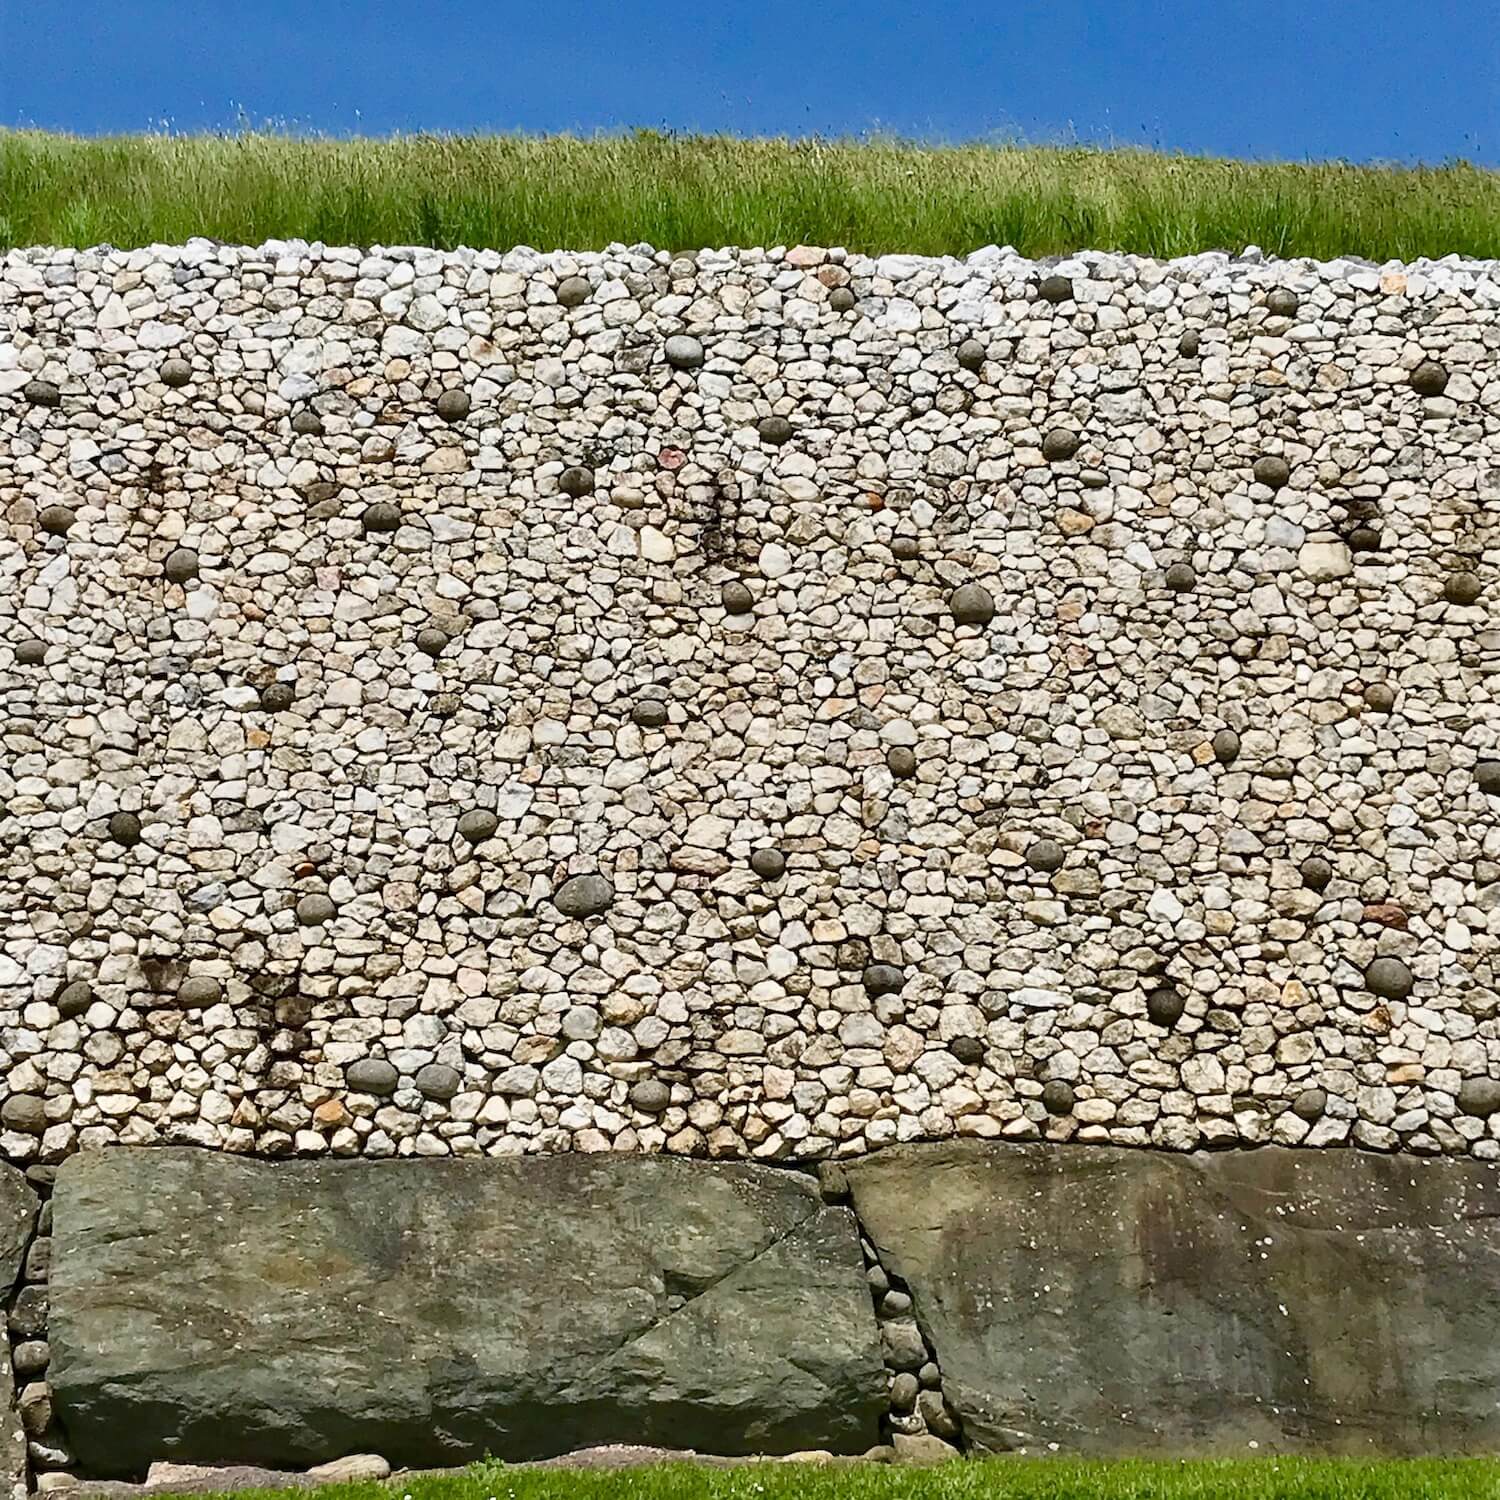 A closeup look at the Newgrange mound shows a wall of whitish stones with larger gray ones interspersed. The wall is framed by green grass on the top of the mound and large granite stones forming a base on the bottom.